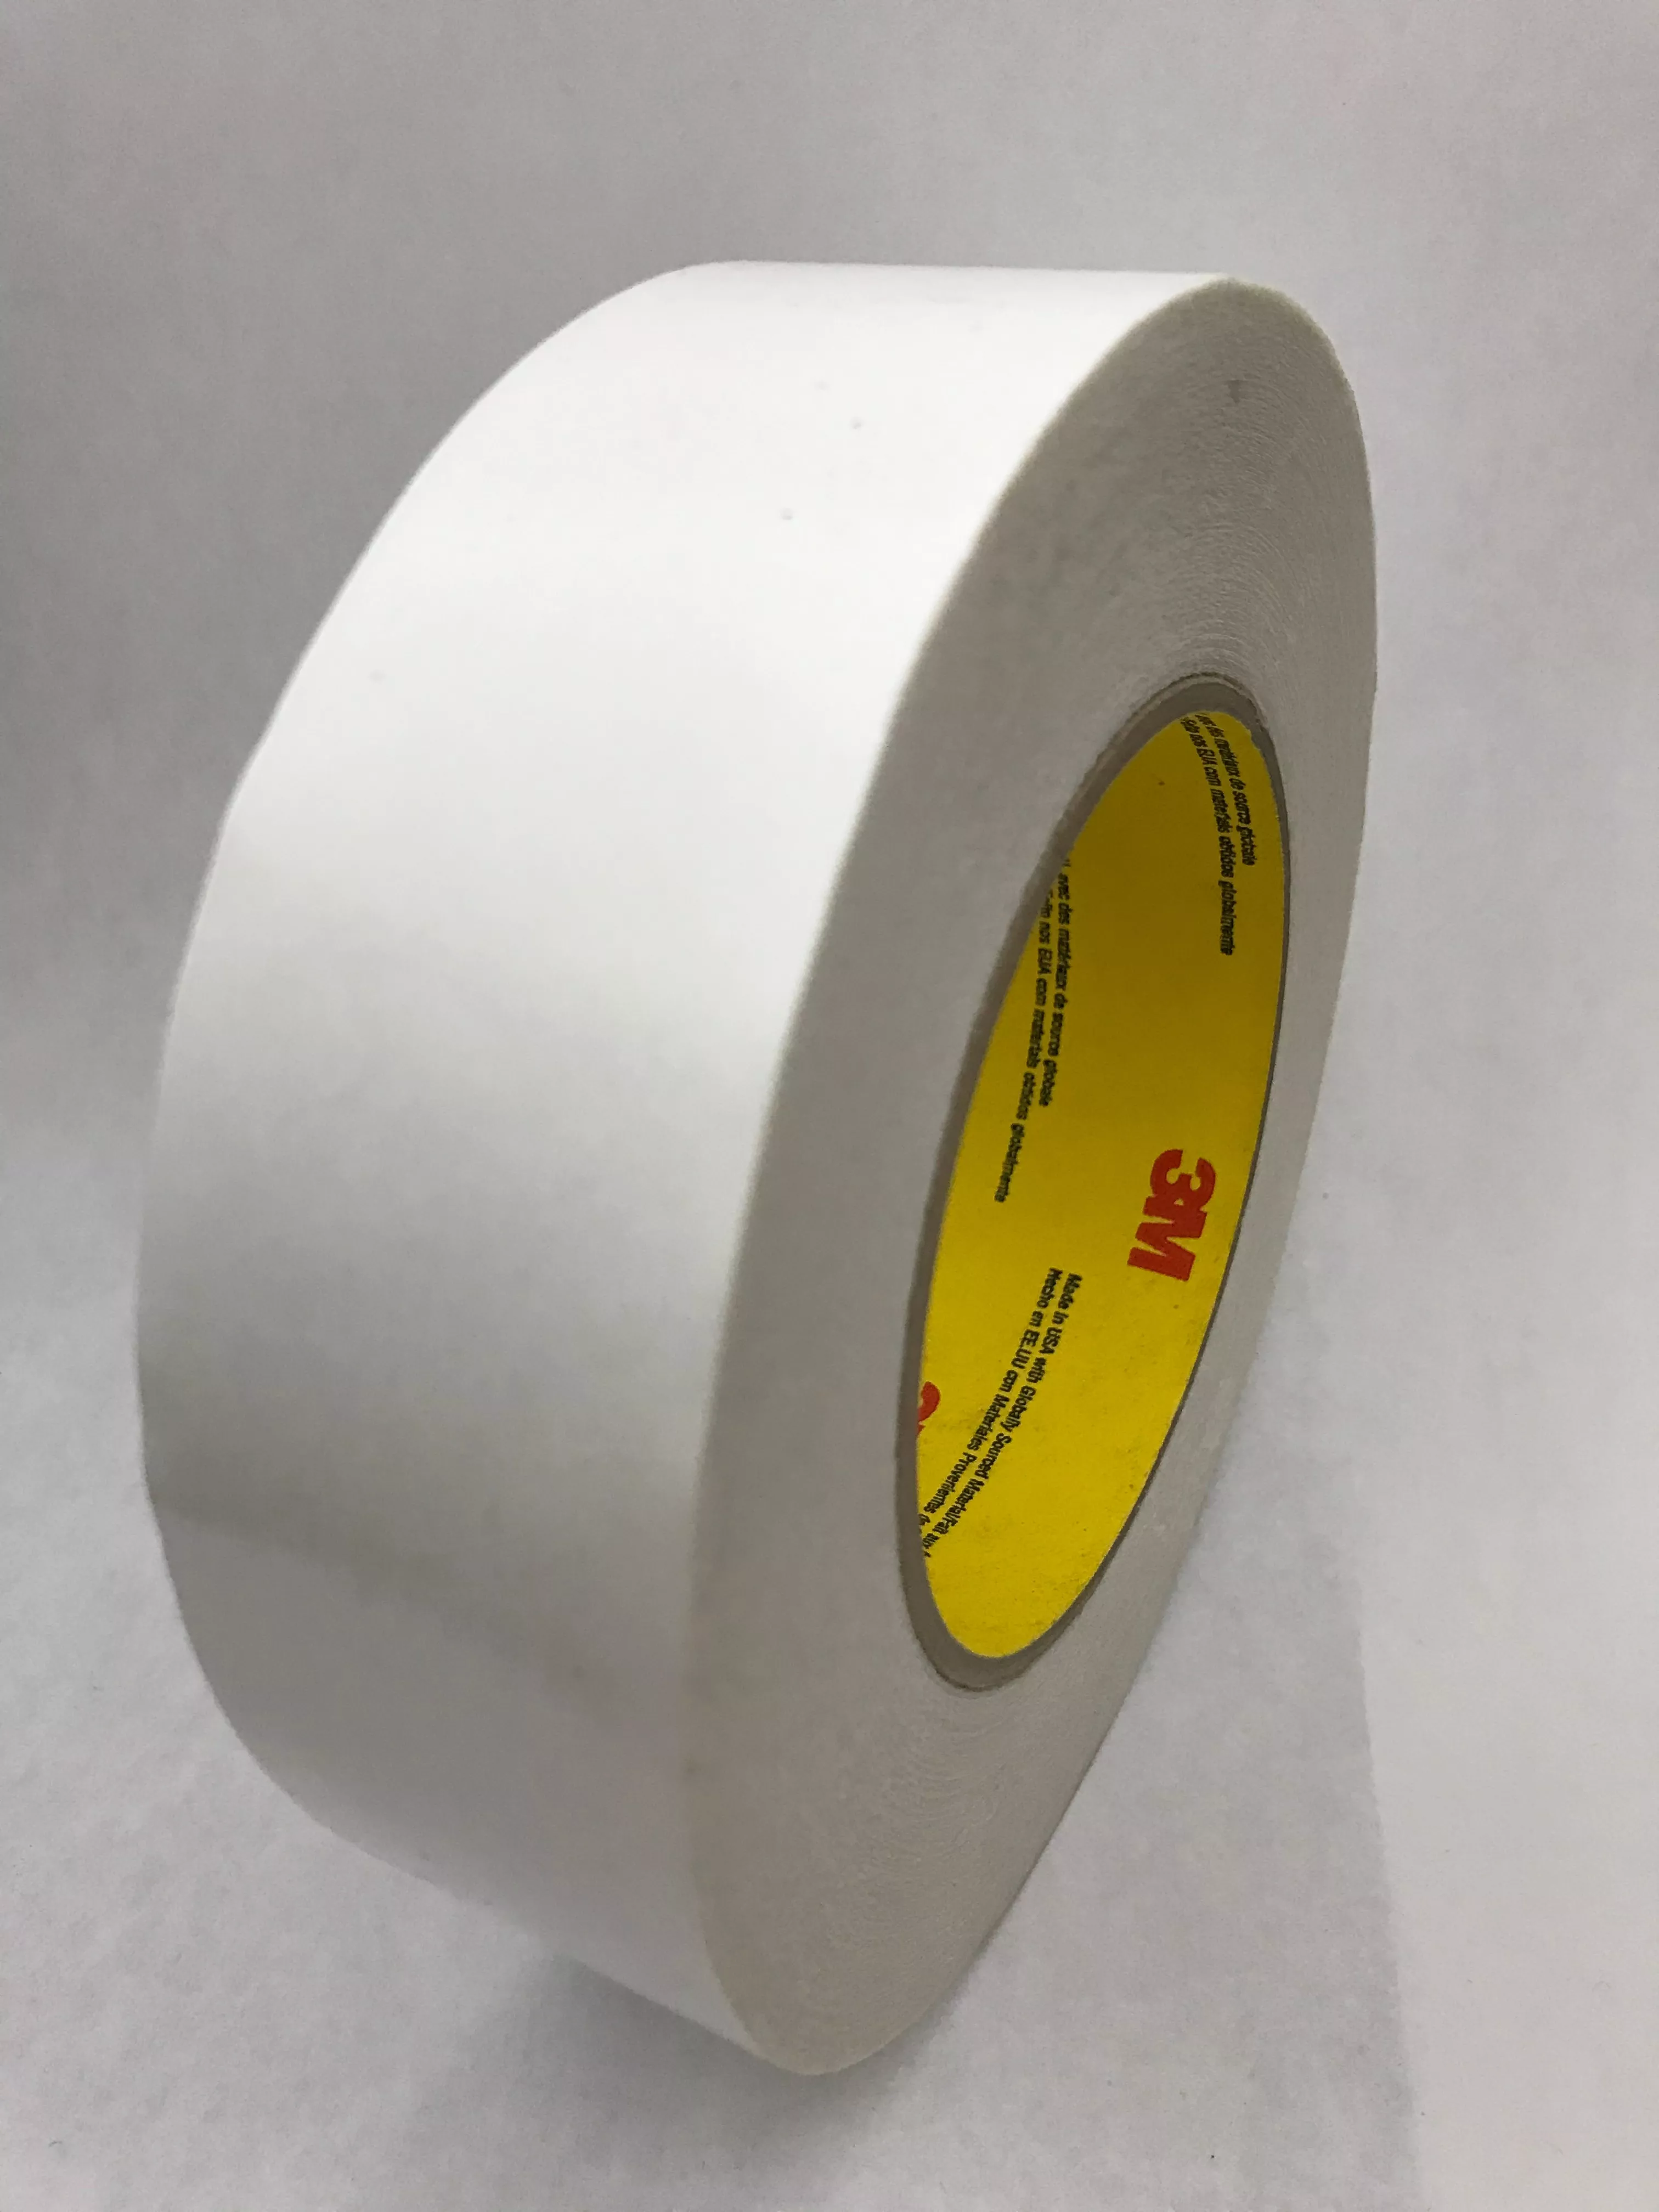 3M™ Venture Tape™ Double Coated Tape 514CW, 2 in x 750 yd, 0.5 mil, 6
Roll/Case